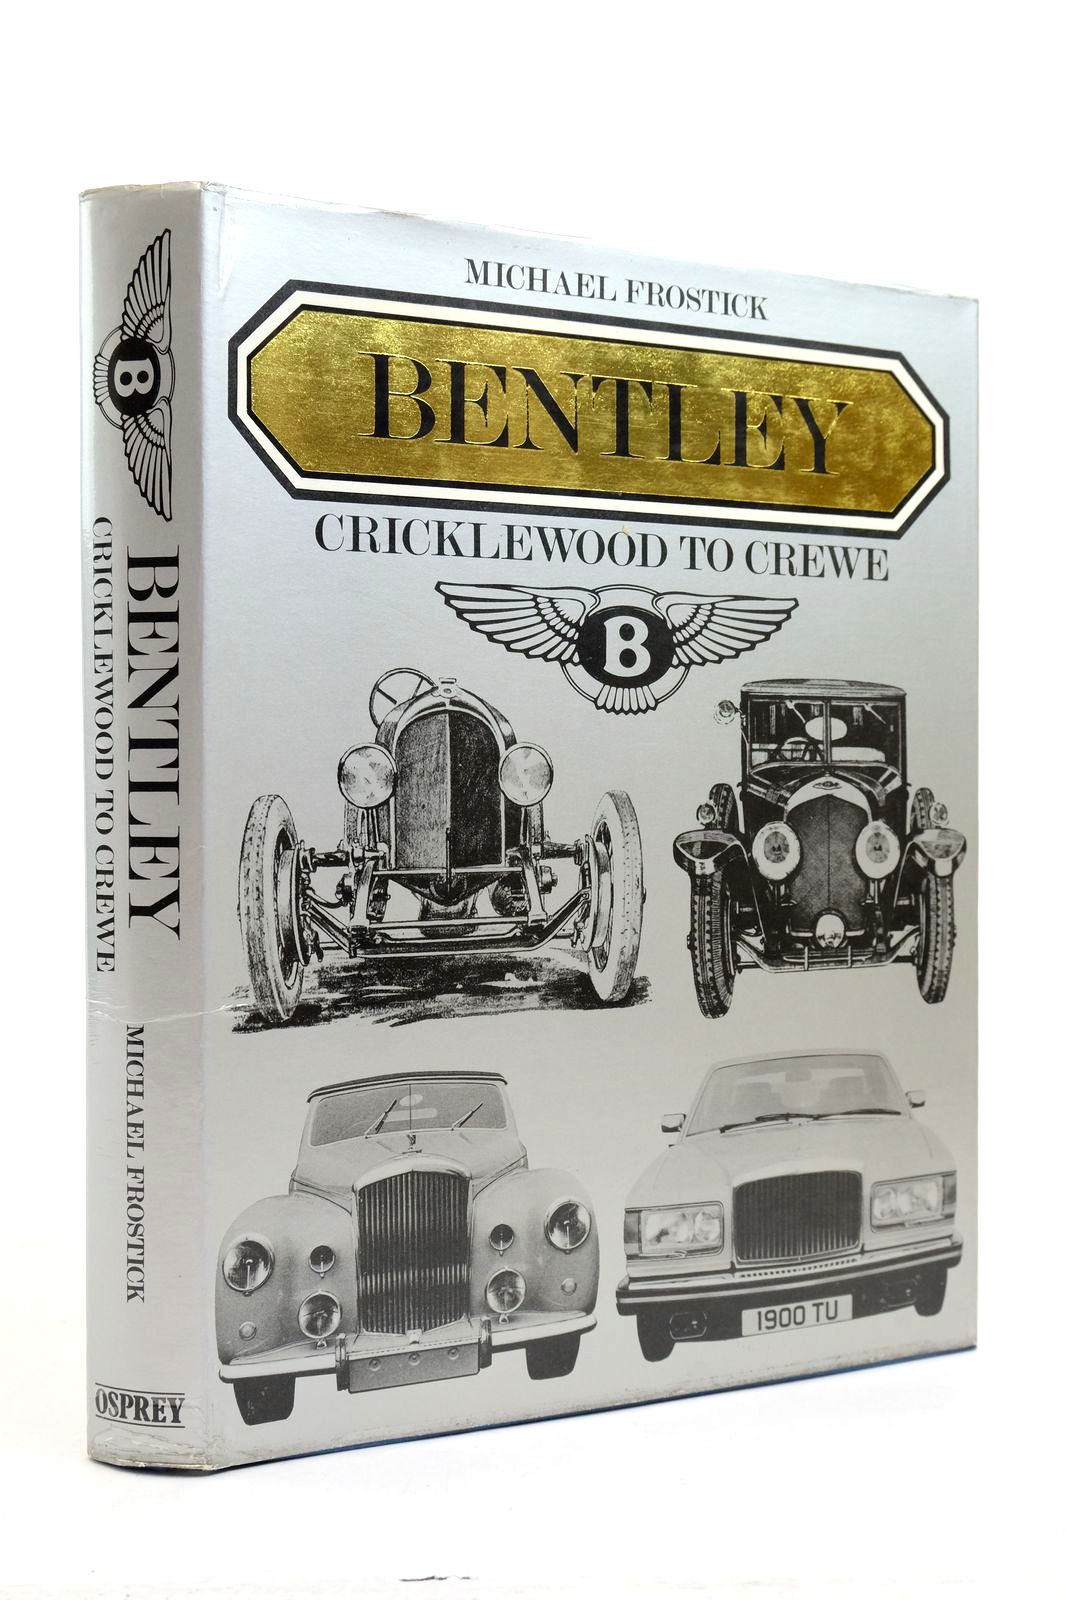 Photo of BENTLEY CRICKLEWOOD TO CREWE written by Frostick, Michael published by Osprey Publishing (STOCK CODE: 2139950)  for sale by Stella & Rose's Books